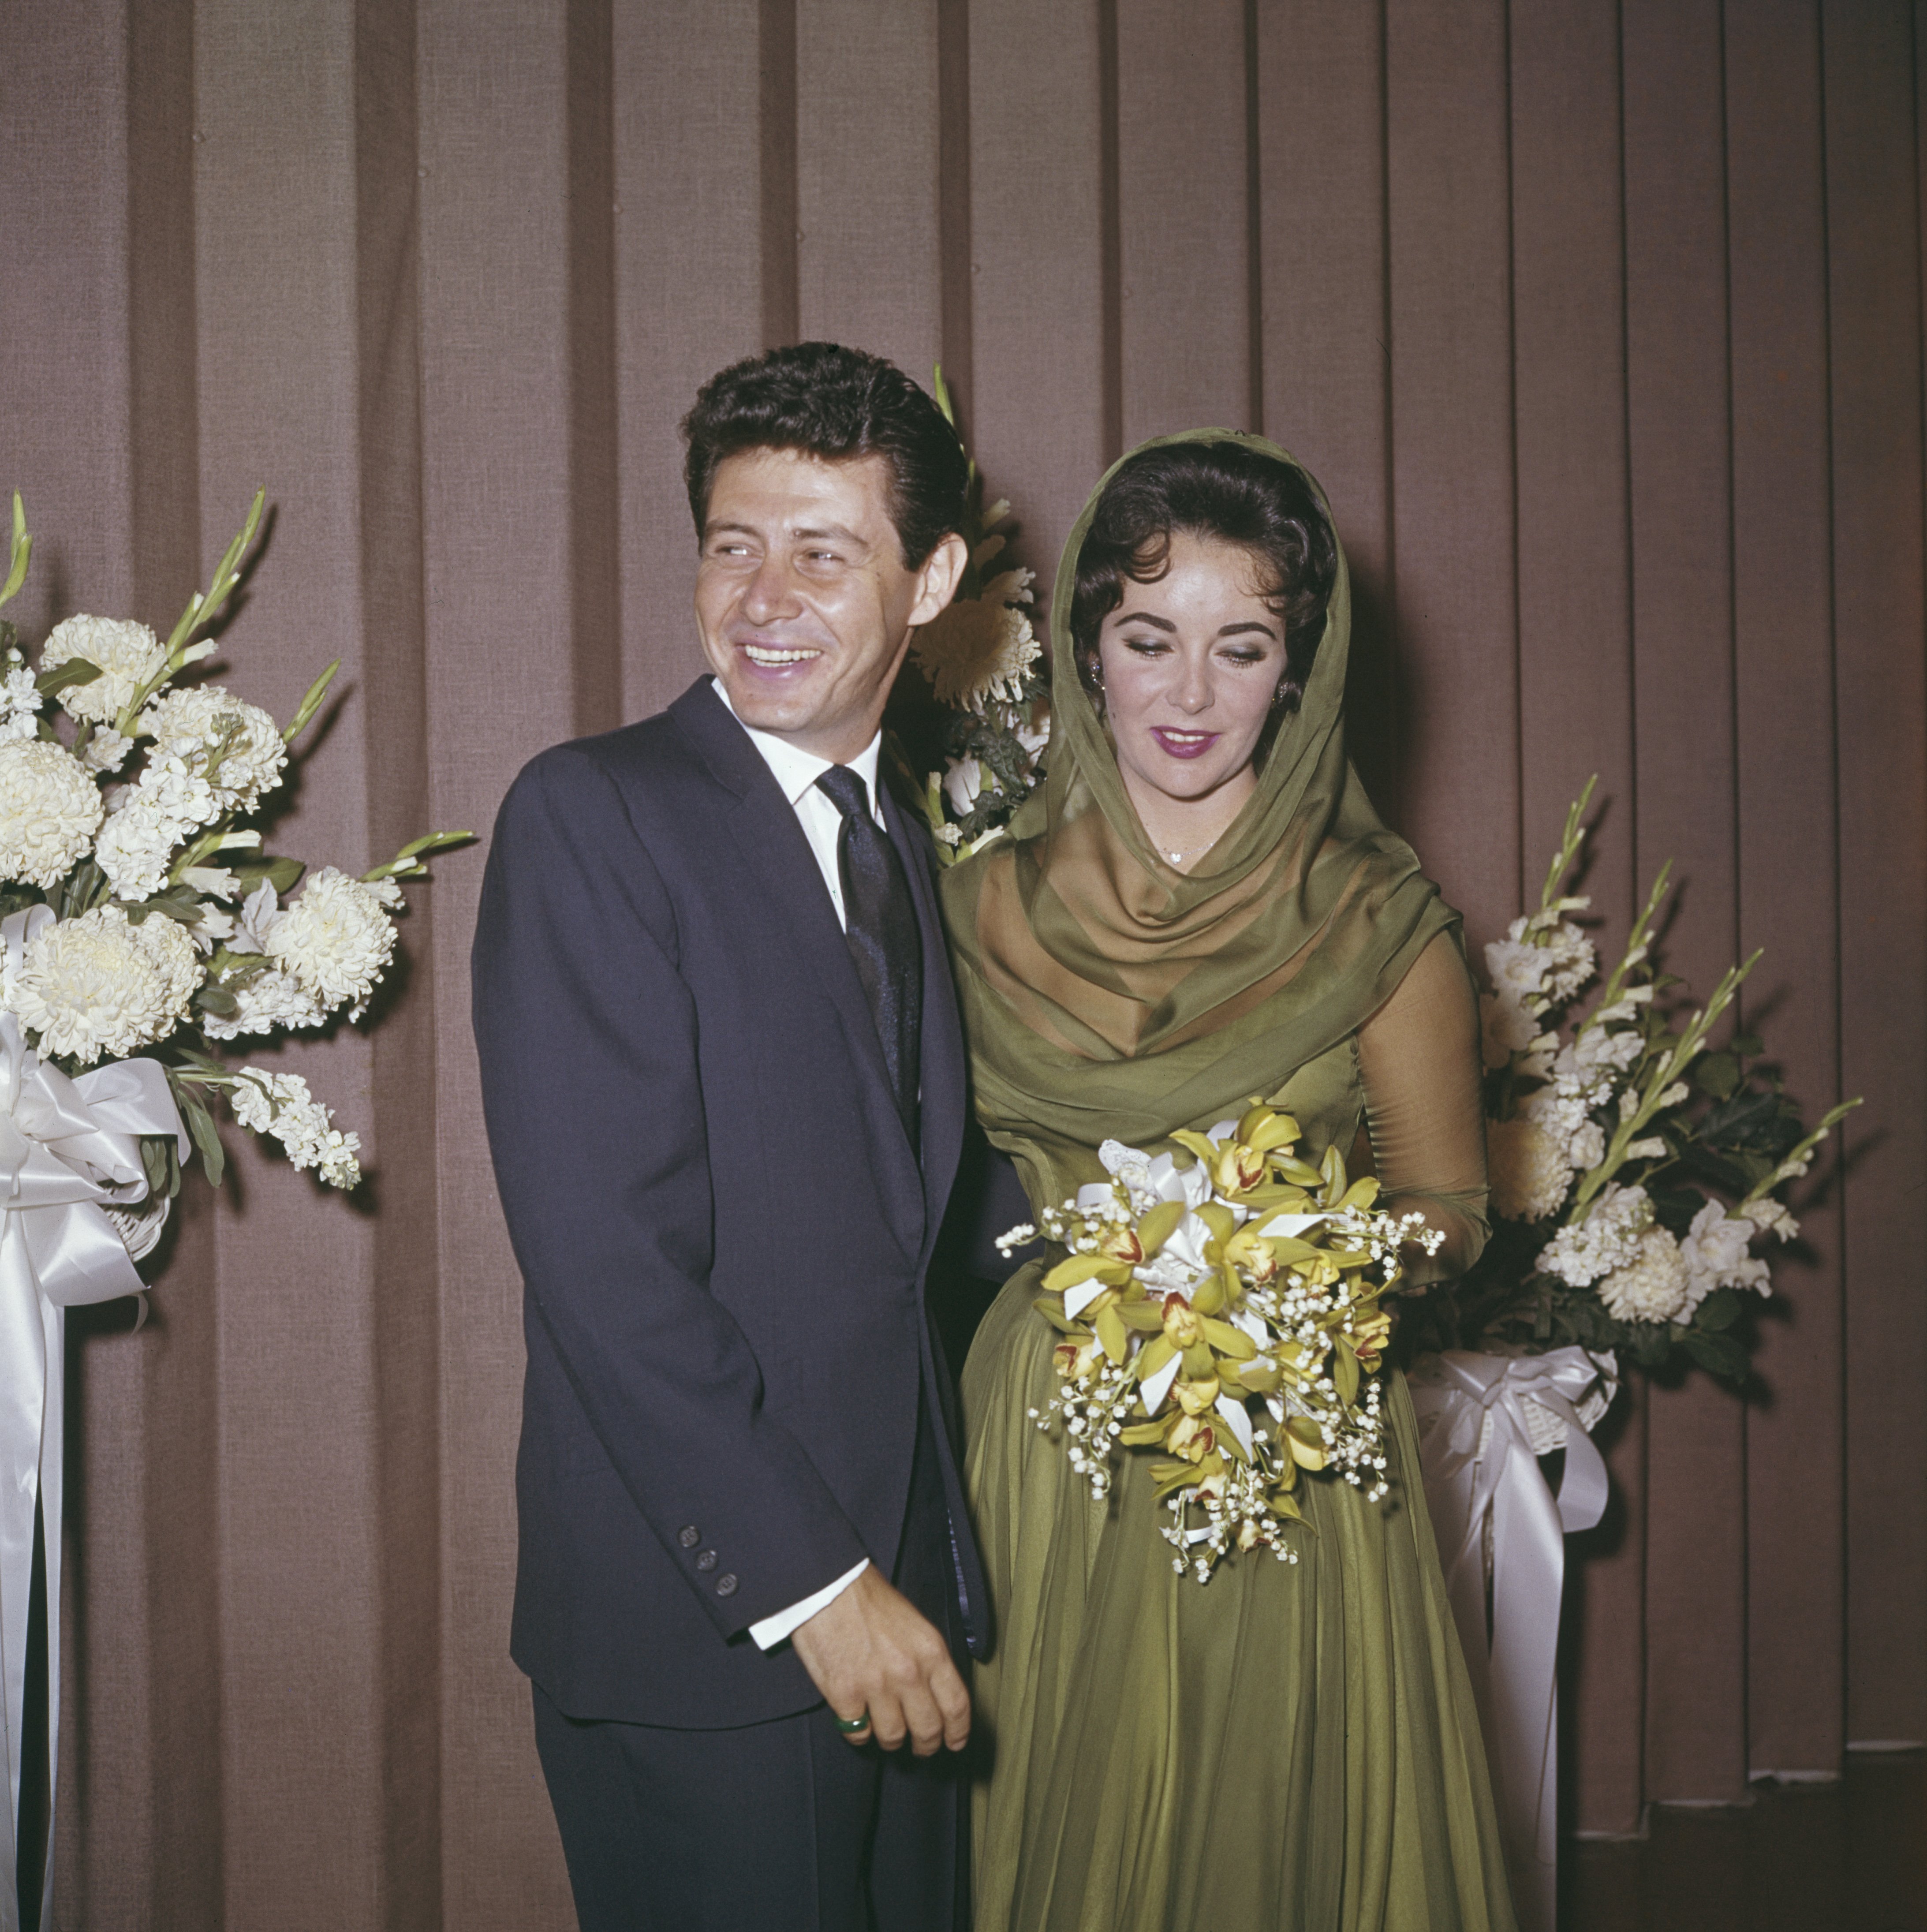 British-American actress Elizabeth Taylor pictured with her fourth husband, singer and entertainer Eddie Fisher at their wedding ceremony in Las Vegas on 12th May 1959. | Source: Getty Images